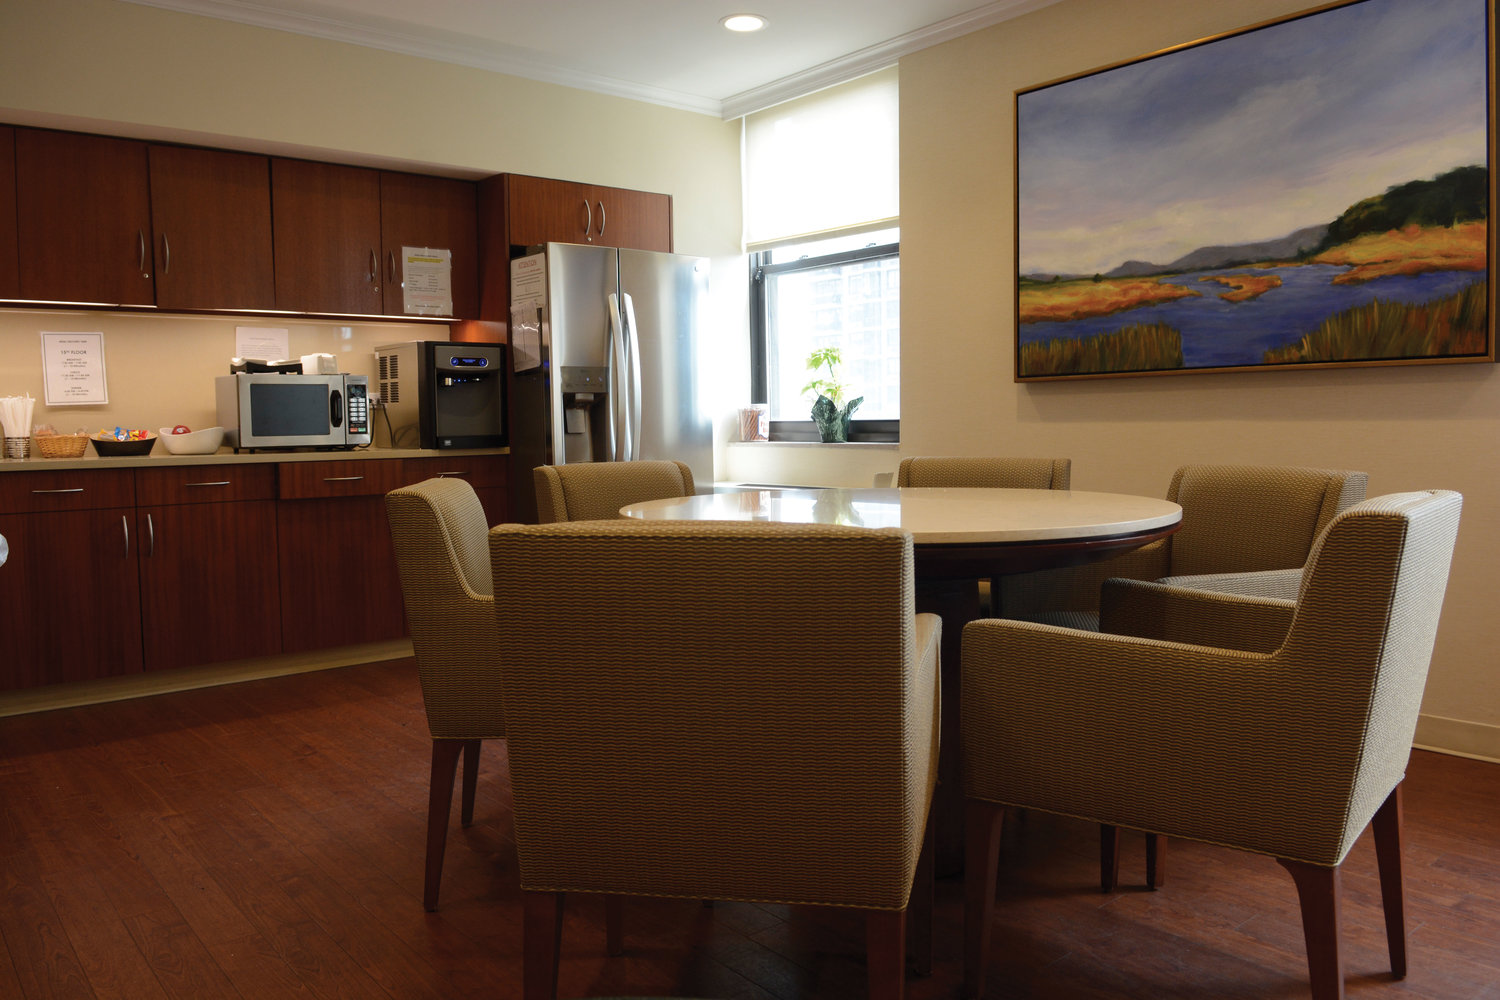 The kitchen and lounge is open to staff, patients and visitors to have a conversation or enjoy a quick bite to eat at Dawn Greene.